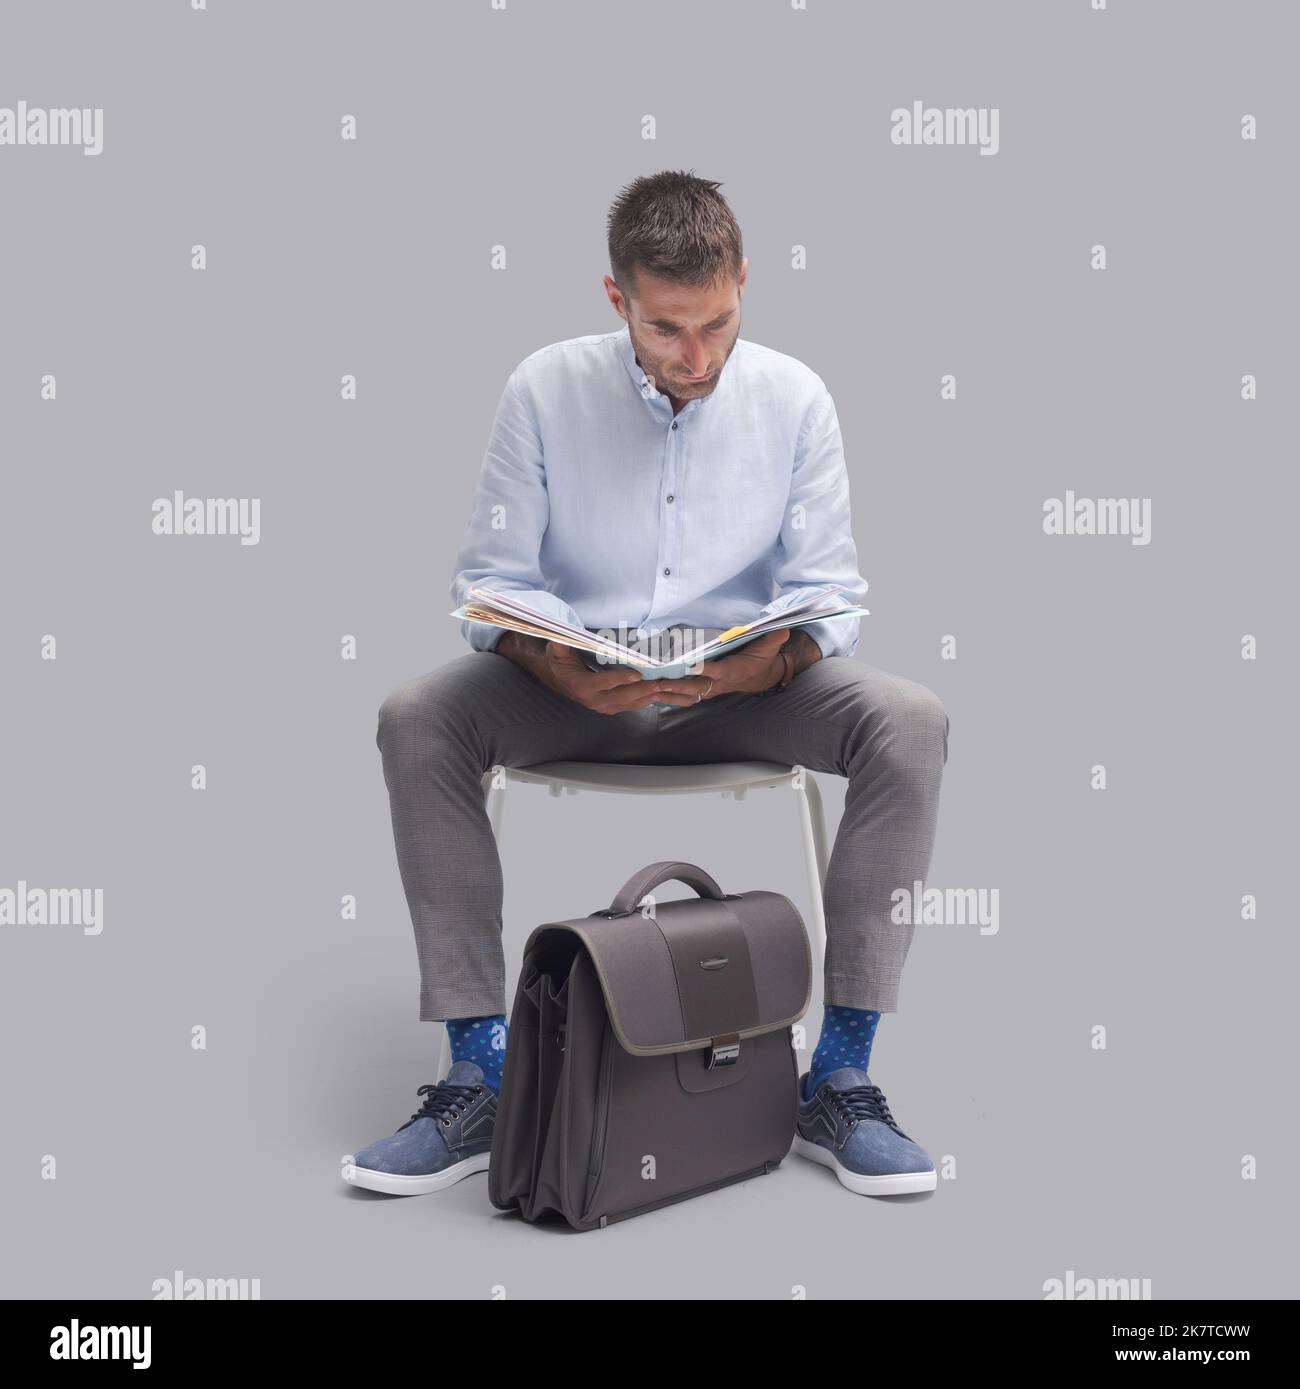 Man sitting on a chair and checking paperwork, he is waiting for a meeting Stock Photo